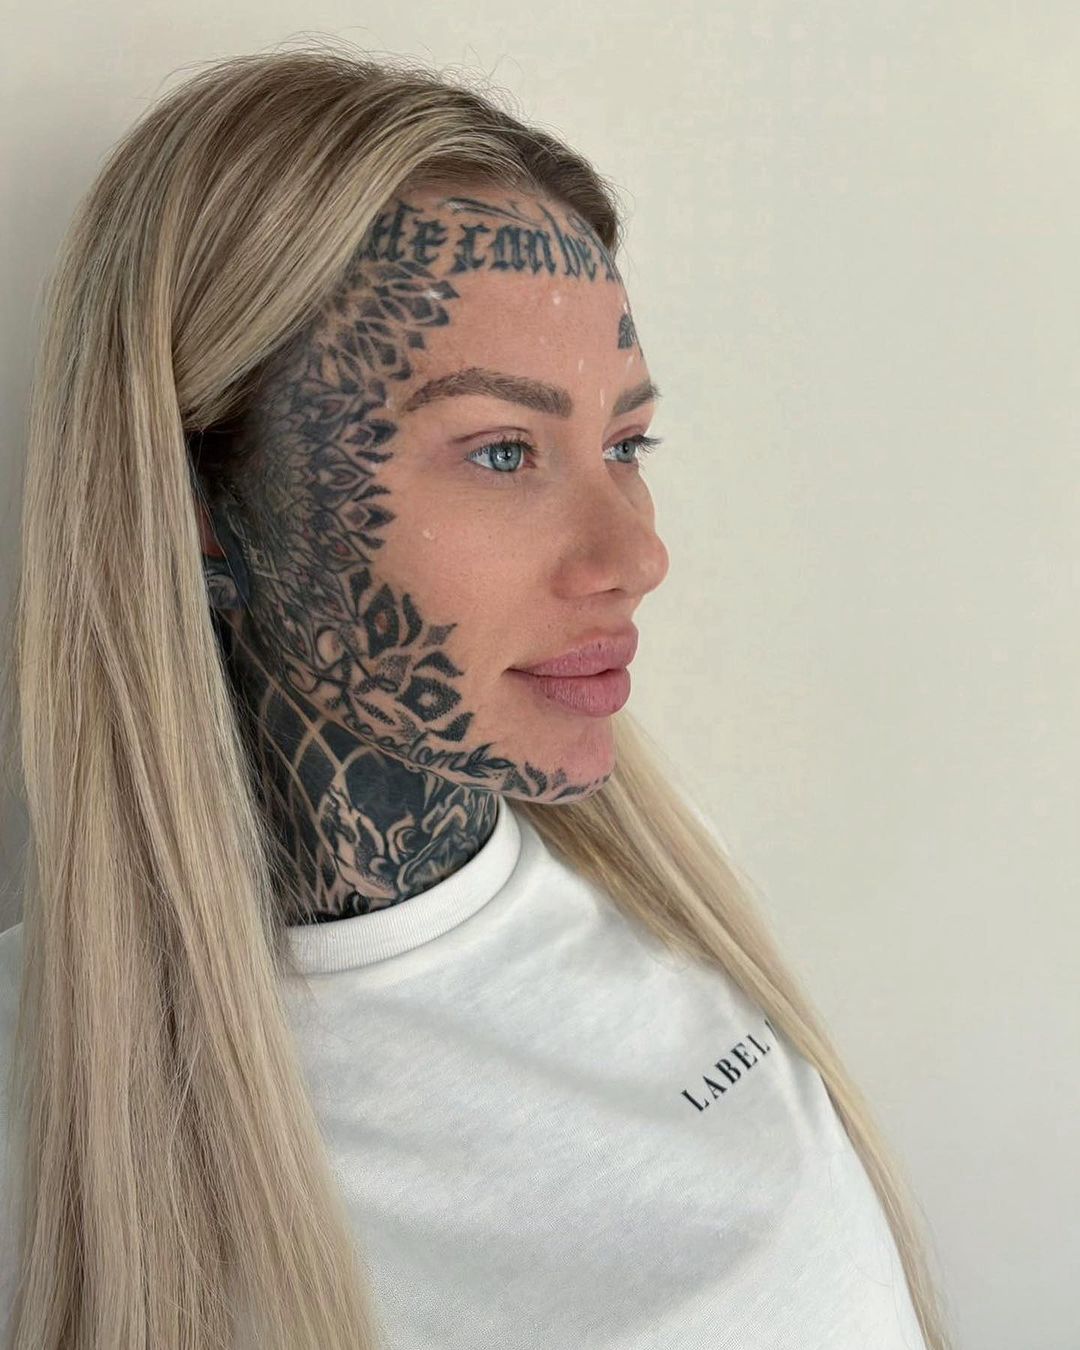 Here is the most tattooed mom in the UK. She has spent a fortune on it and doesn't plan to stop.